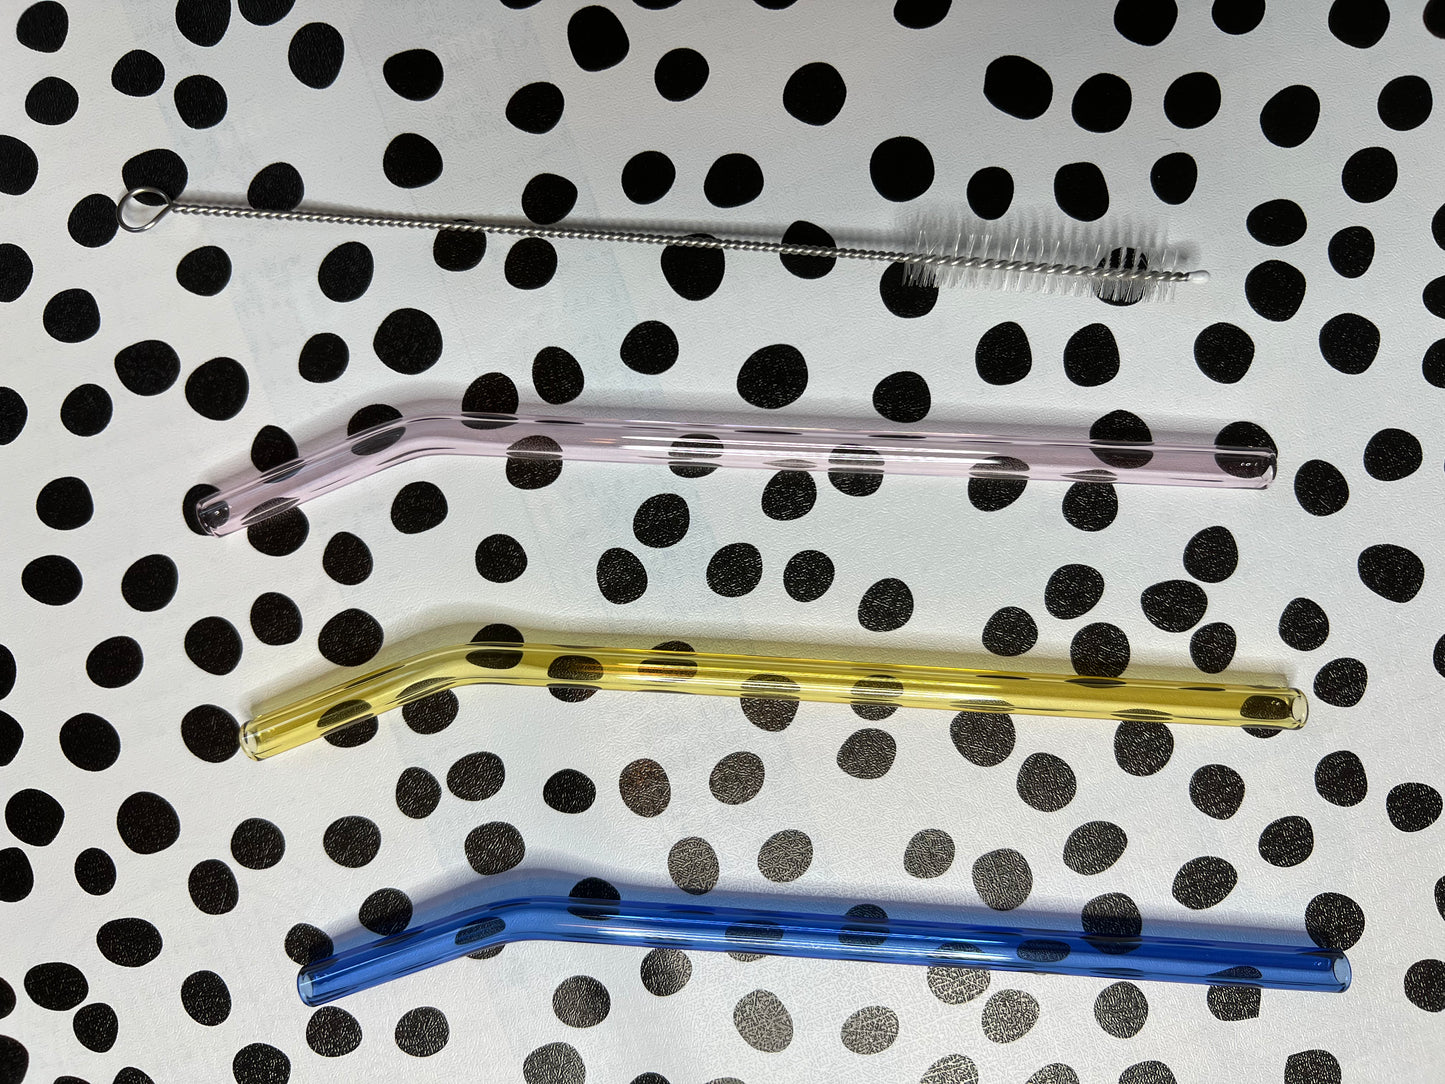 reusable glass straw (more colors + clear)